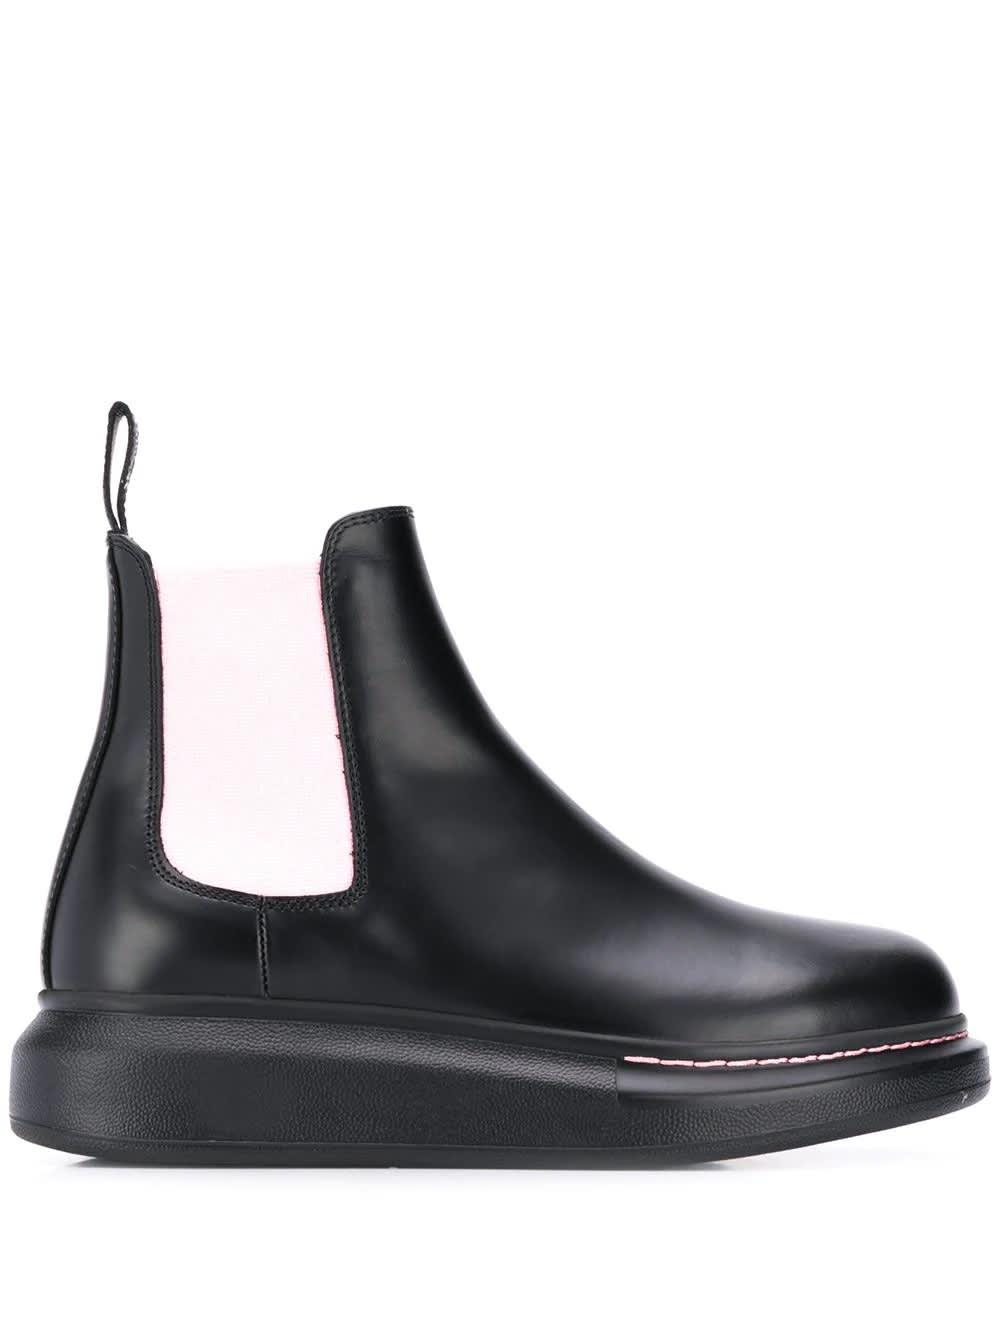 Buy Alexander McQueen Woman Black And Pastel Pink Chelsea Hybrid Ankle Boot online, shop Alexander McQueen shoes with free shipping